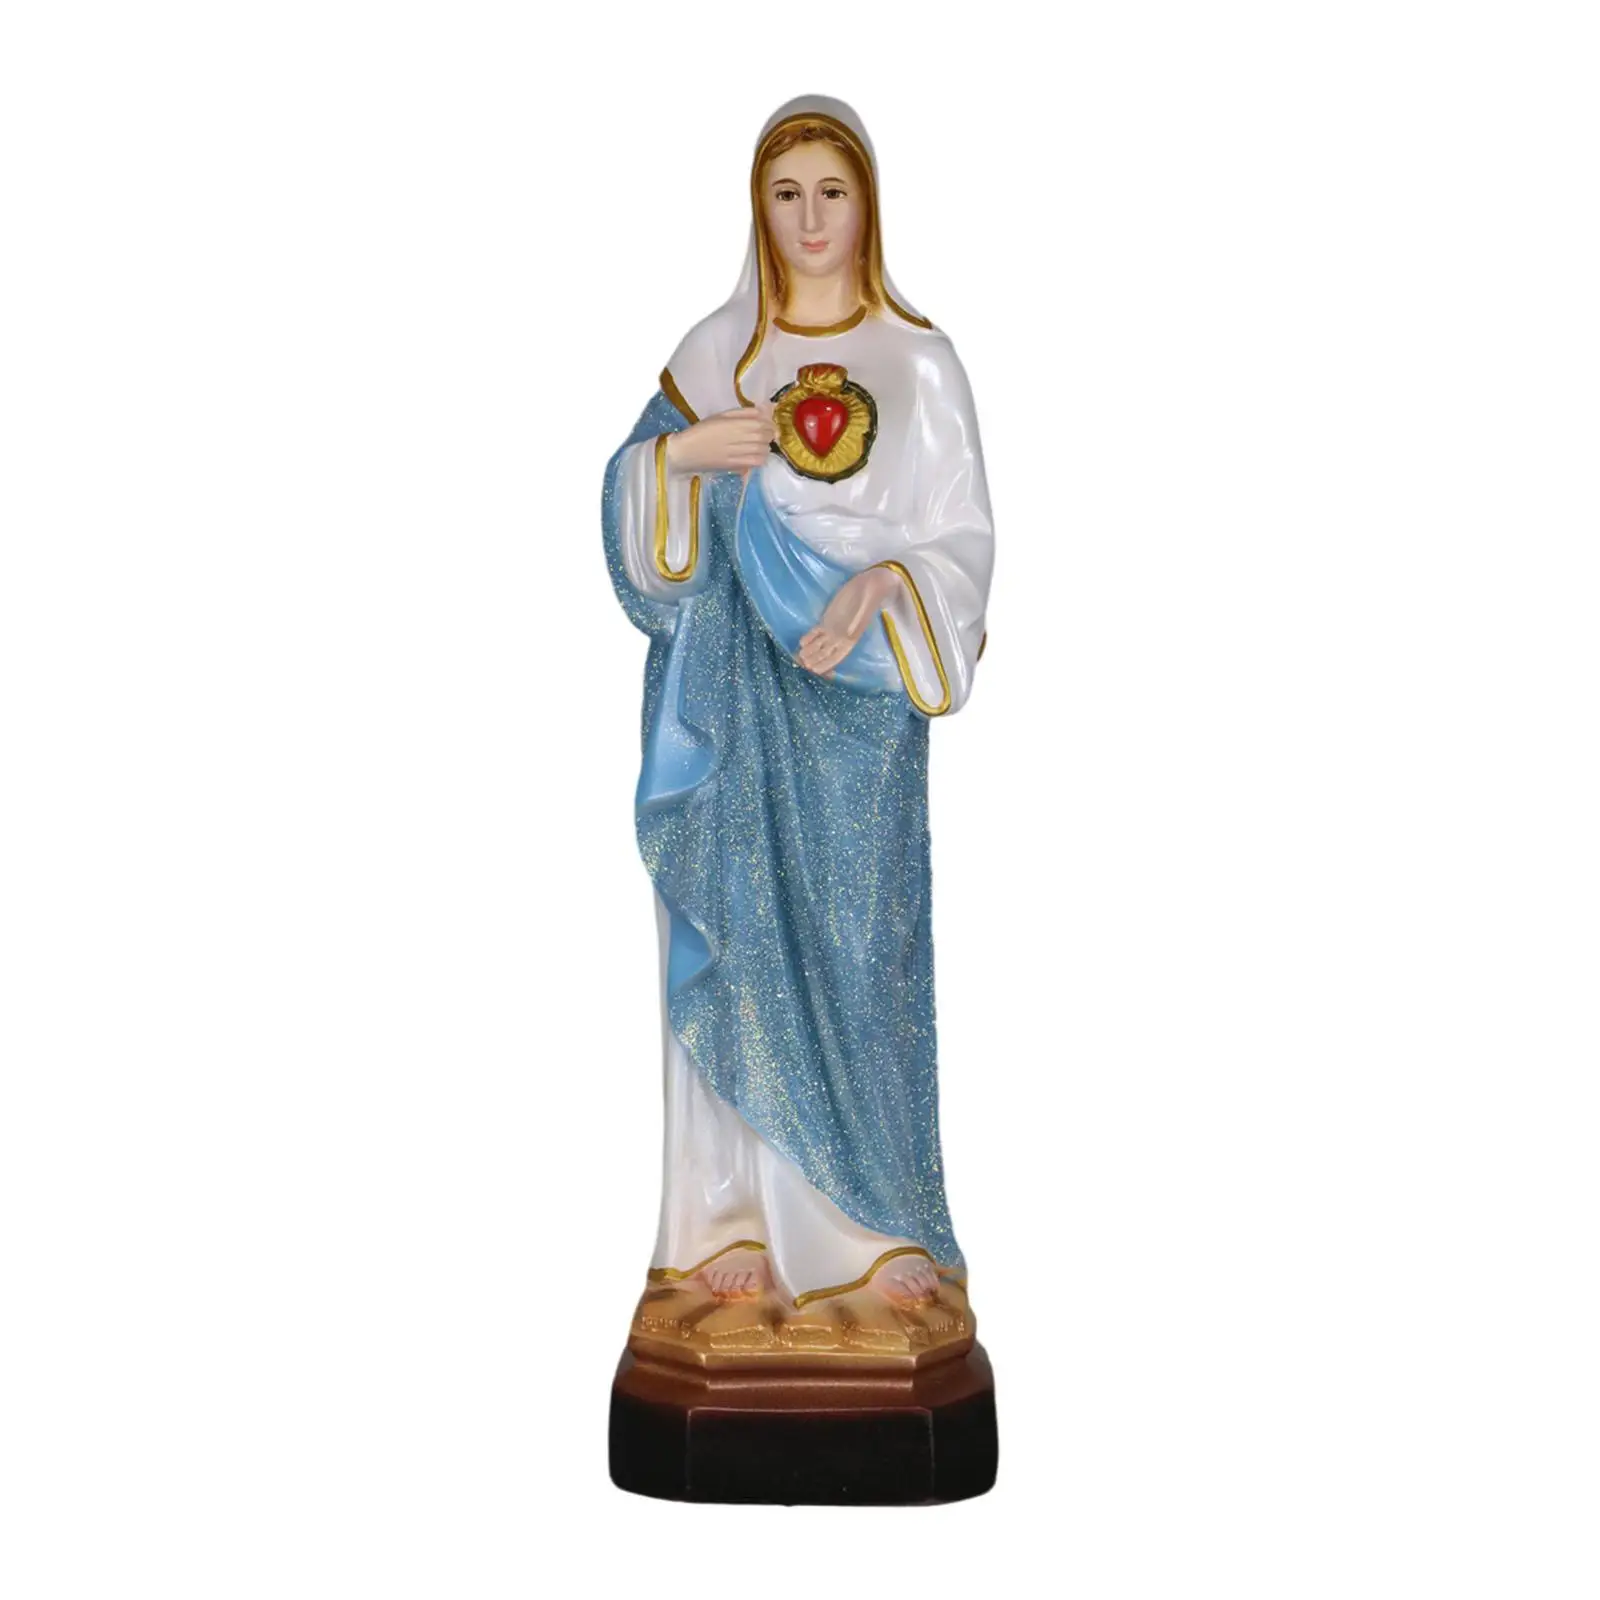 Holy Mary Figure Sacred Heart of Mary Figurine Desk Display Christmas Decoration Crafts Catholic Statue Sculpture for Church